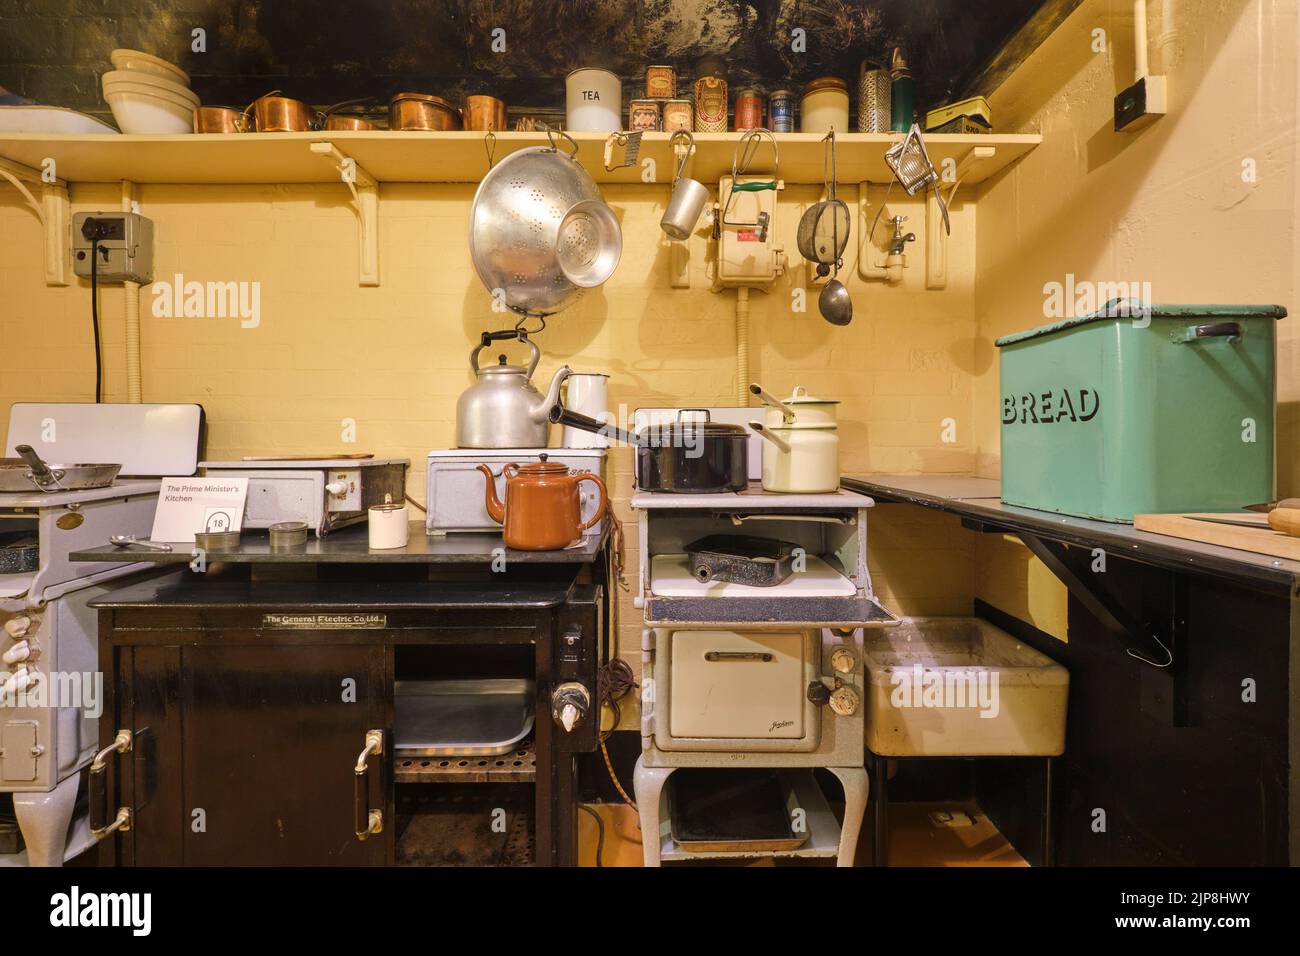 The Prime Minister's kitchen, with stoves and a bread box. At the Winston Churchill War Rooms Museum in London, England, United Kingdom. Stock Photo